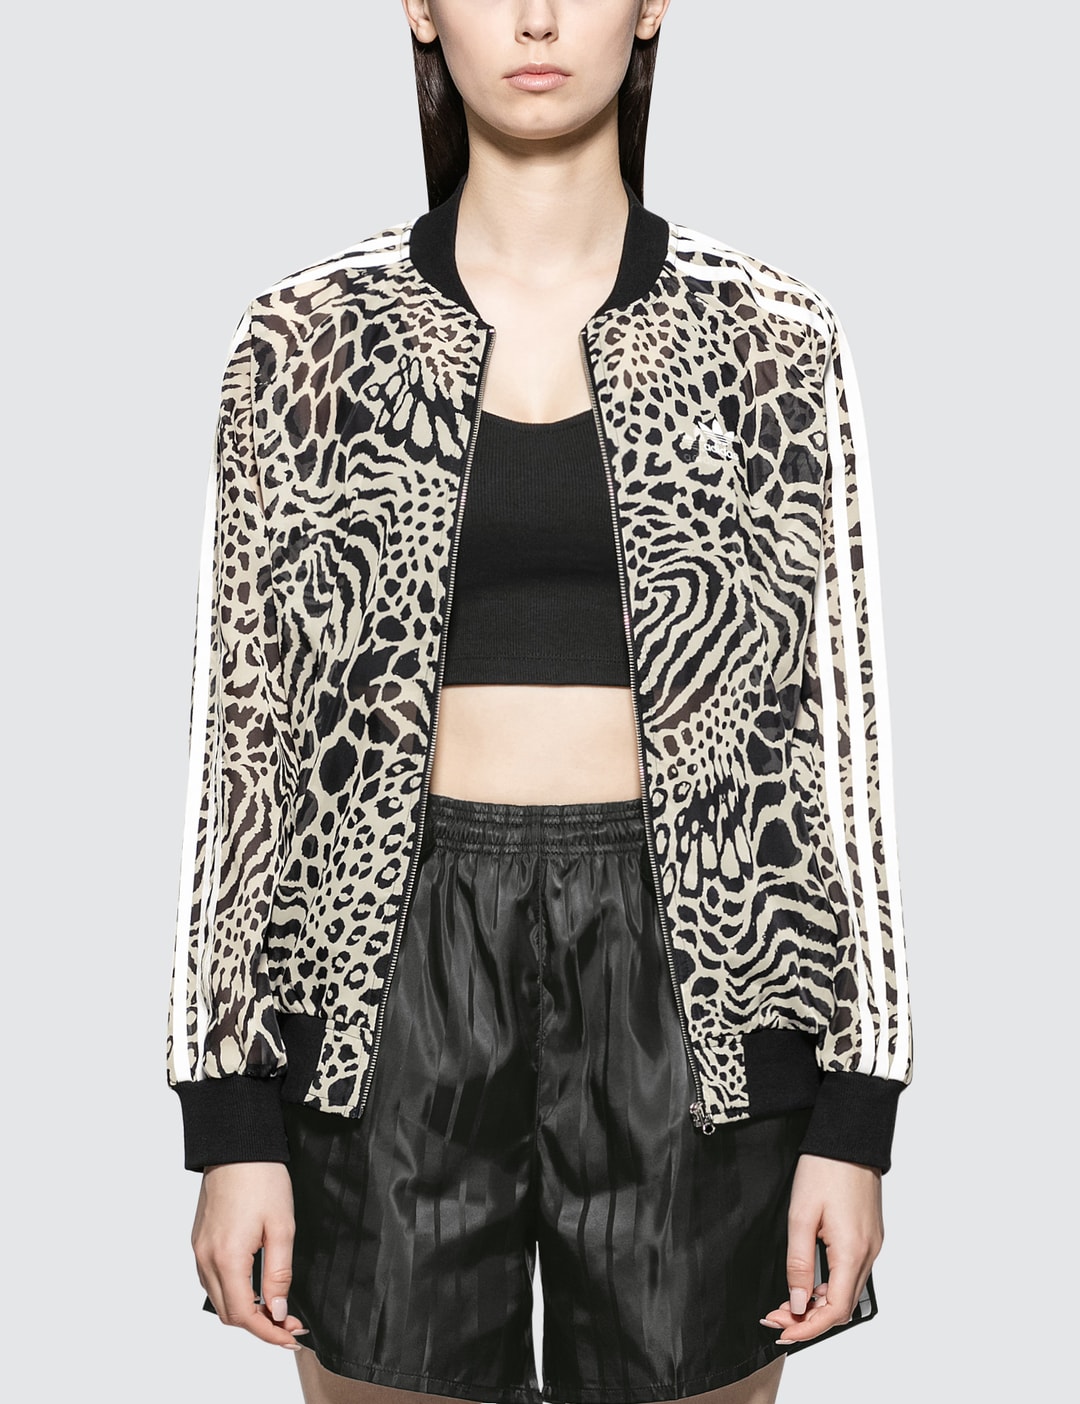 Adidas Originals - Leopard Print Track Jacket | HBX - Globally Curated  Fashion and Lifestyle by Hypebeast